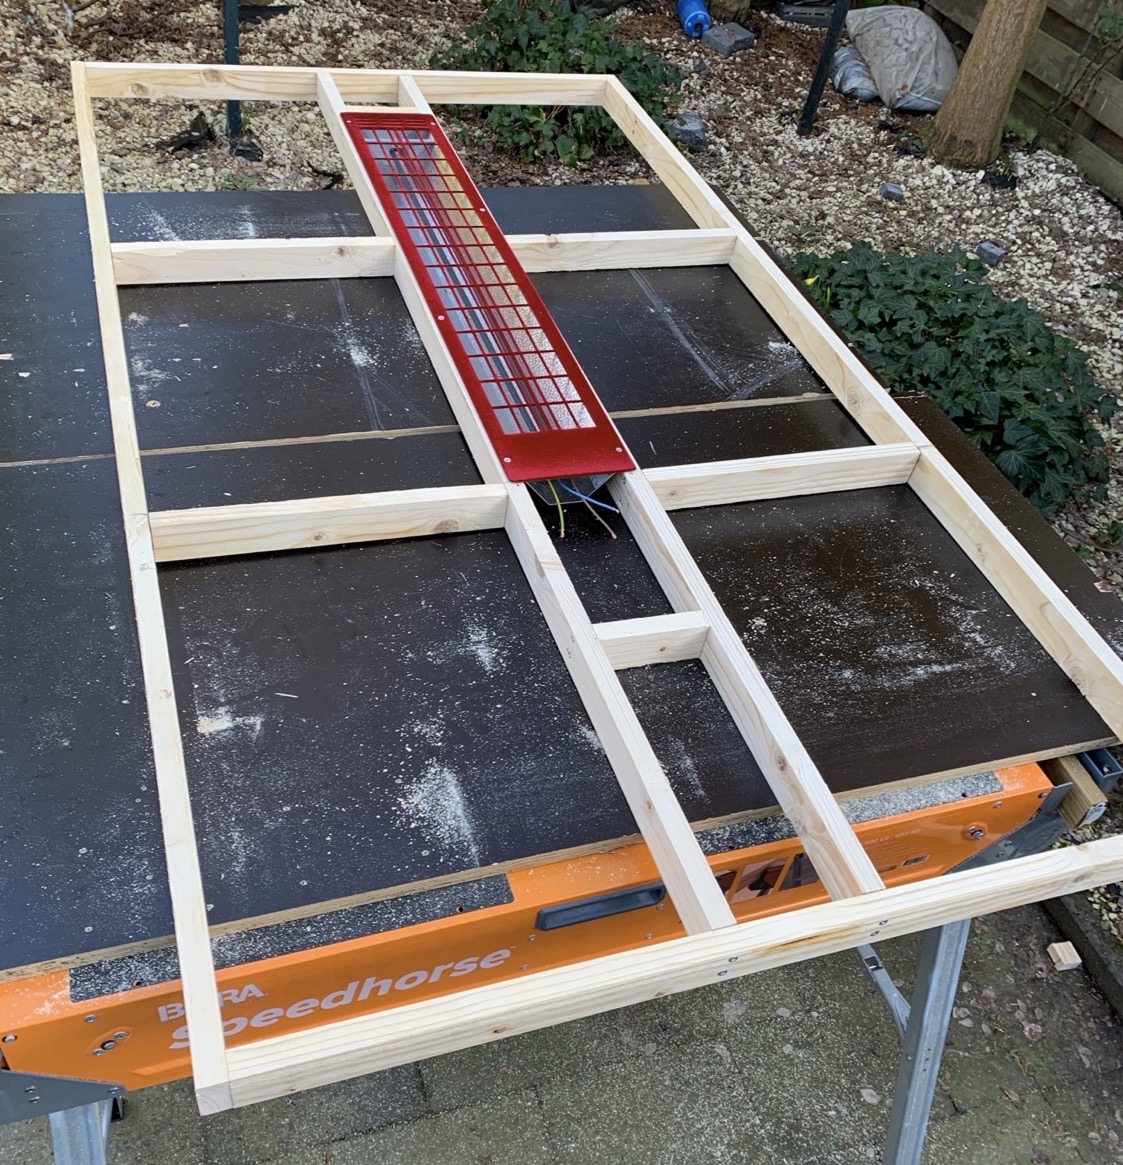 Back wall frame built, with embedded IR heater.